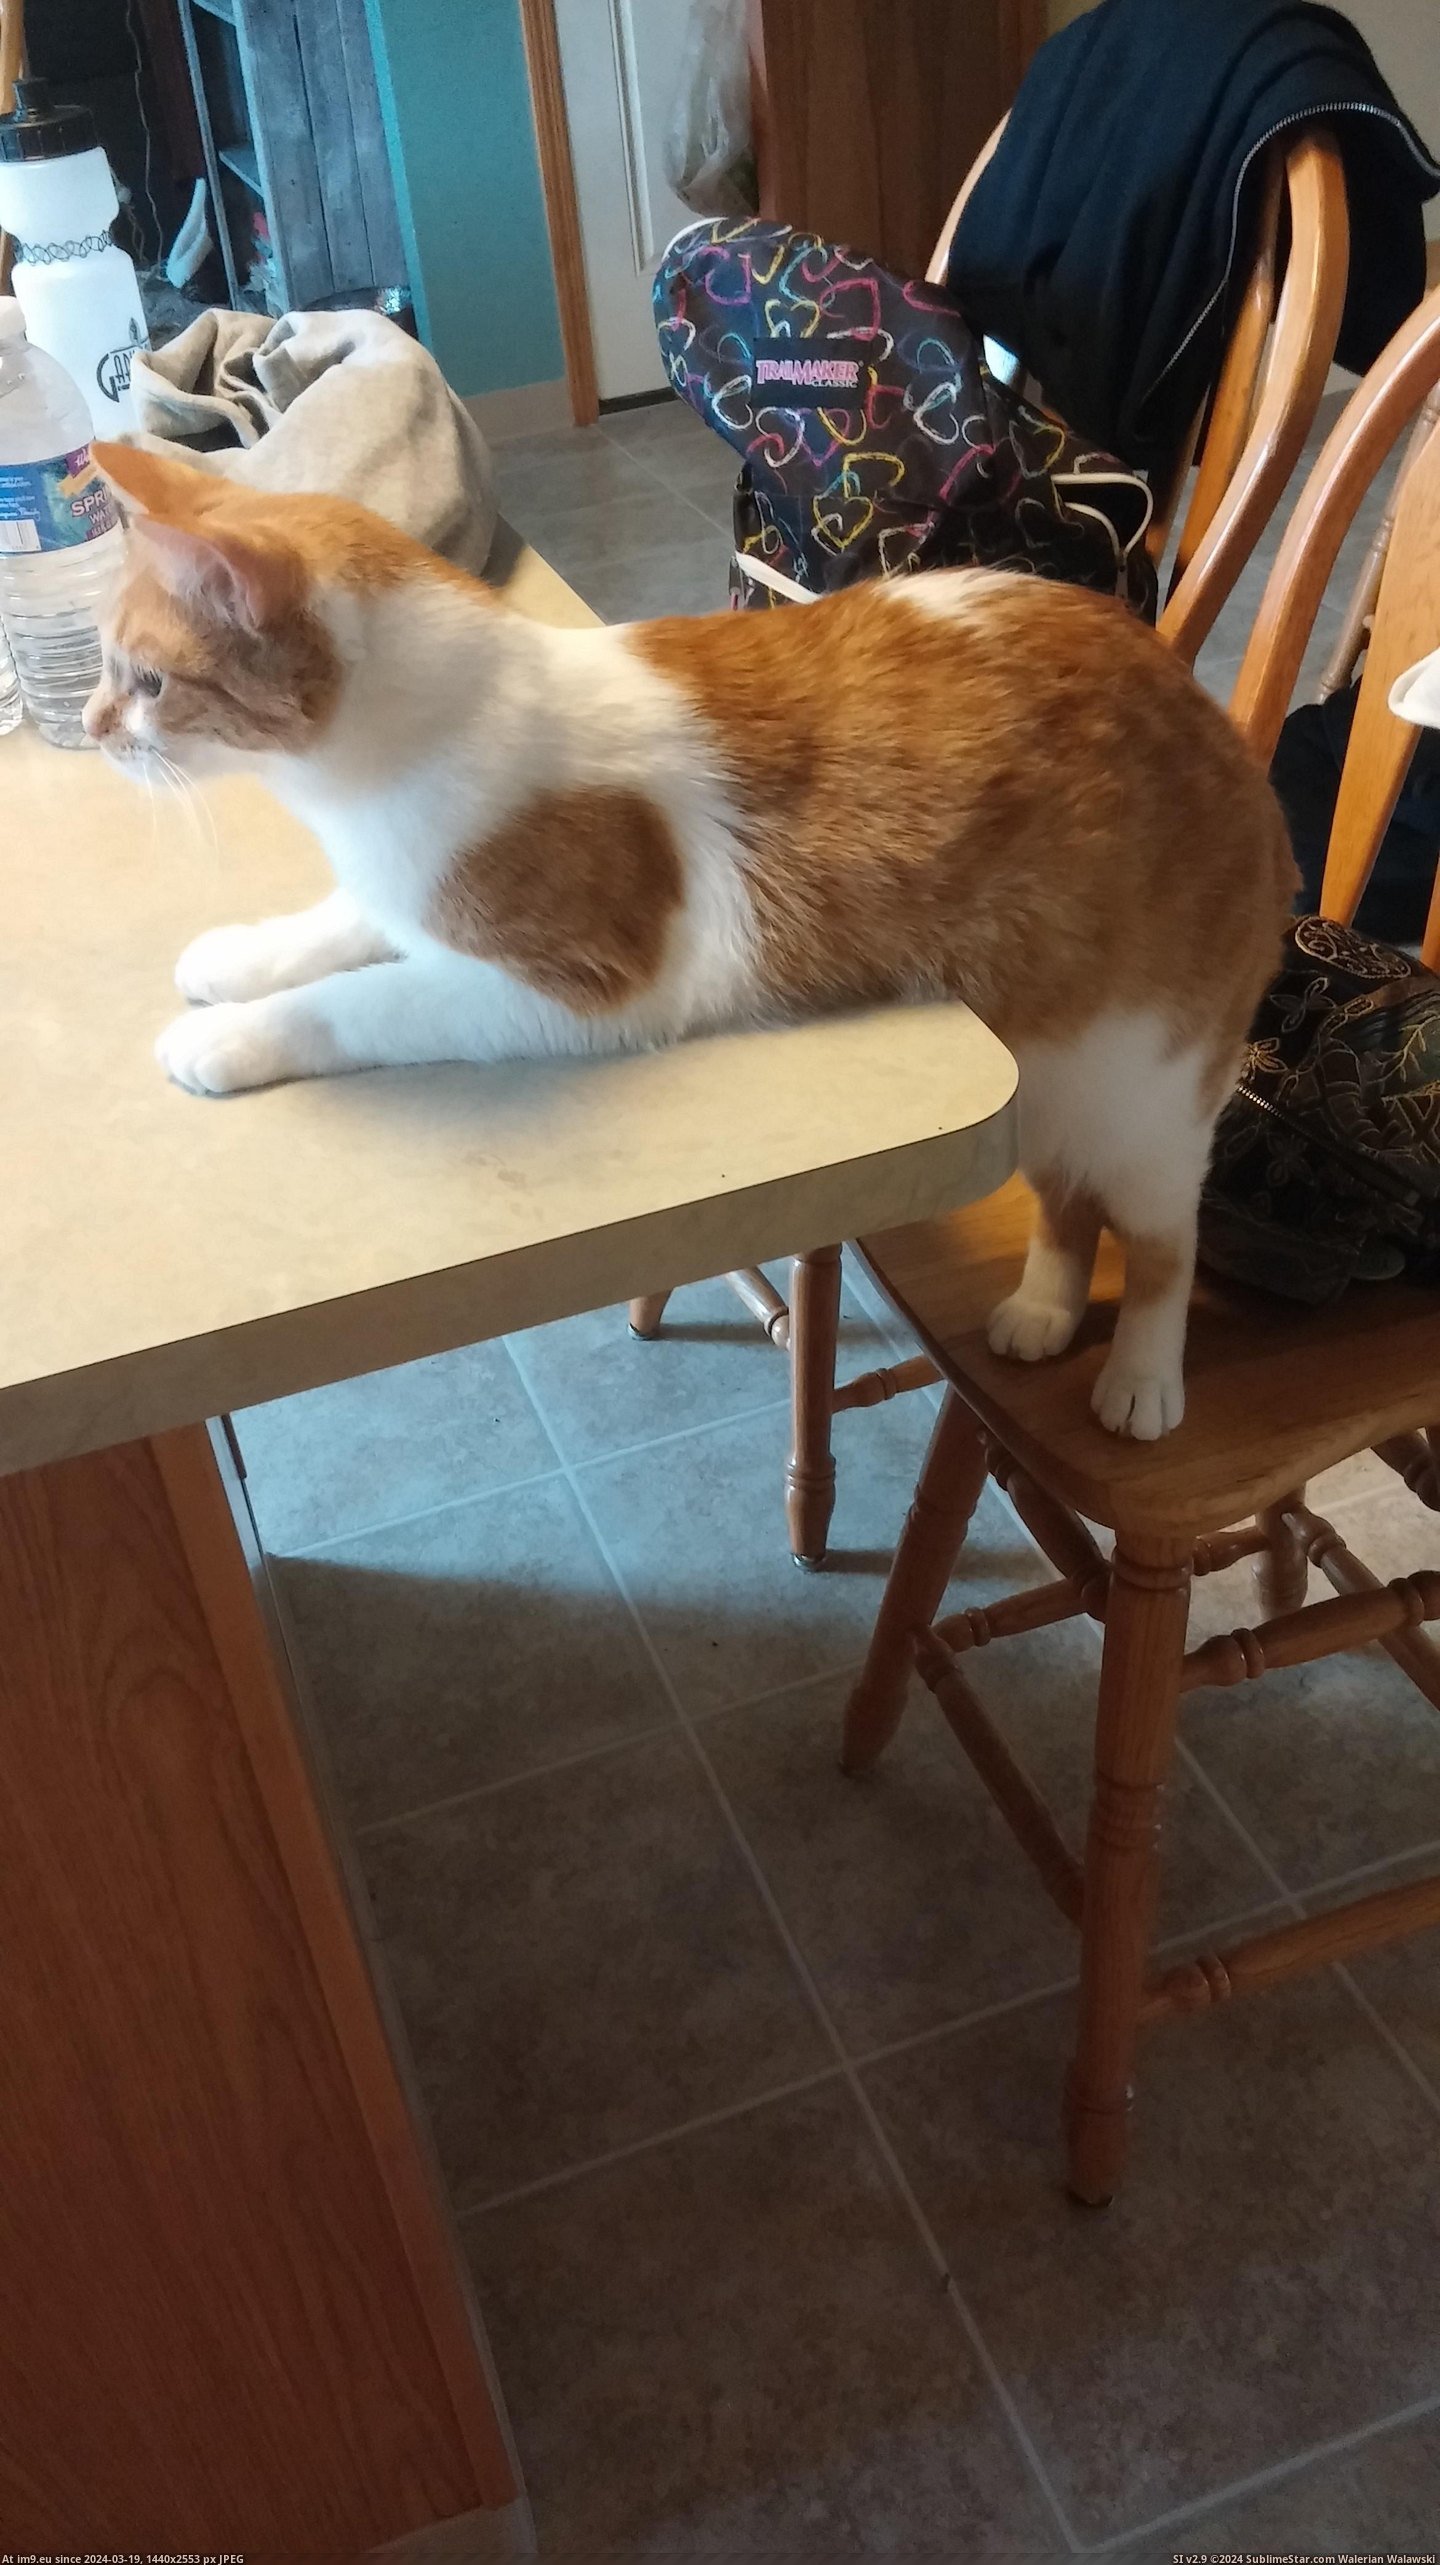 #Cat #Pushing #Charles #Allowed [Aww] My cat Charles is also not allowed on the table. He's pushing it though... Pic. (Изображение из альбом My r/AWW favs))